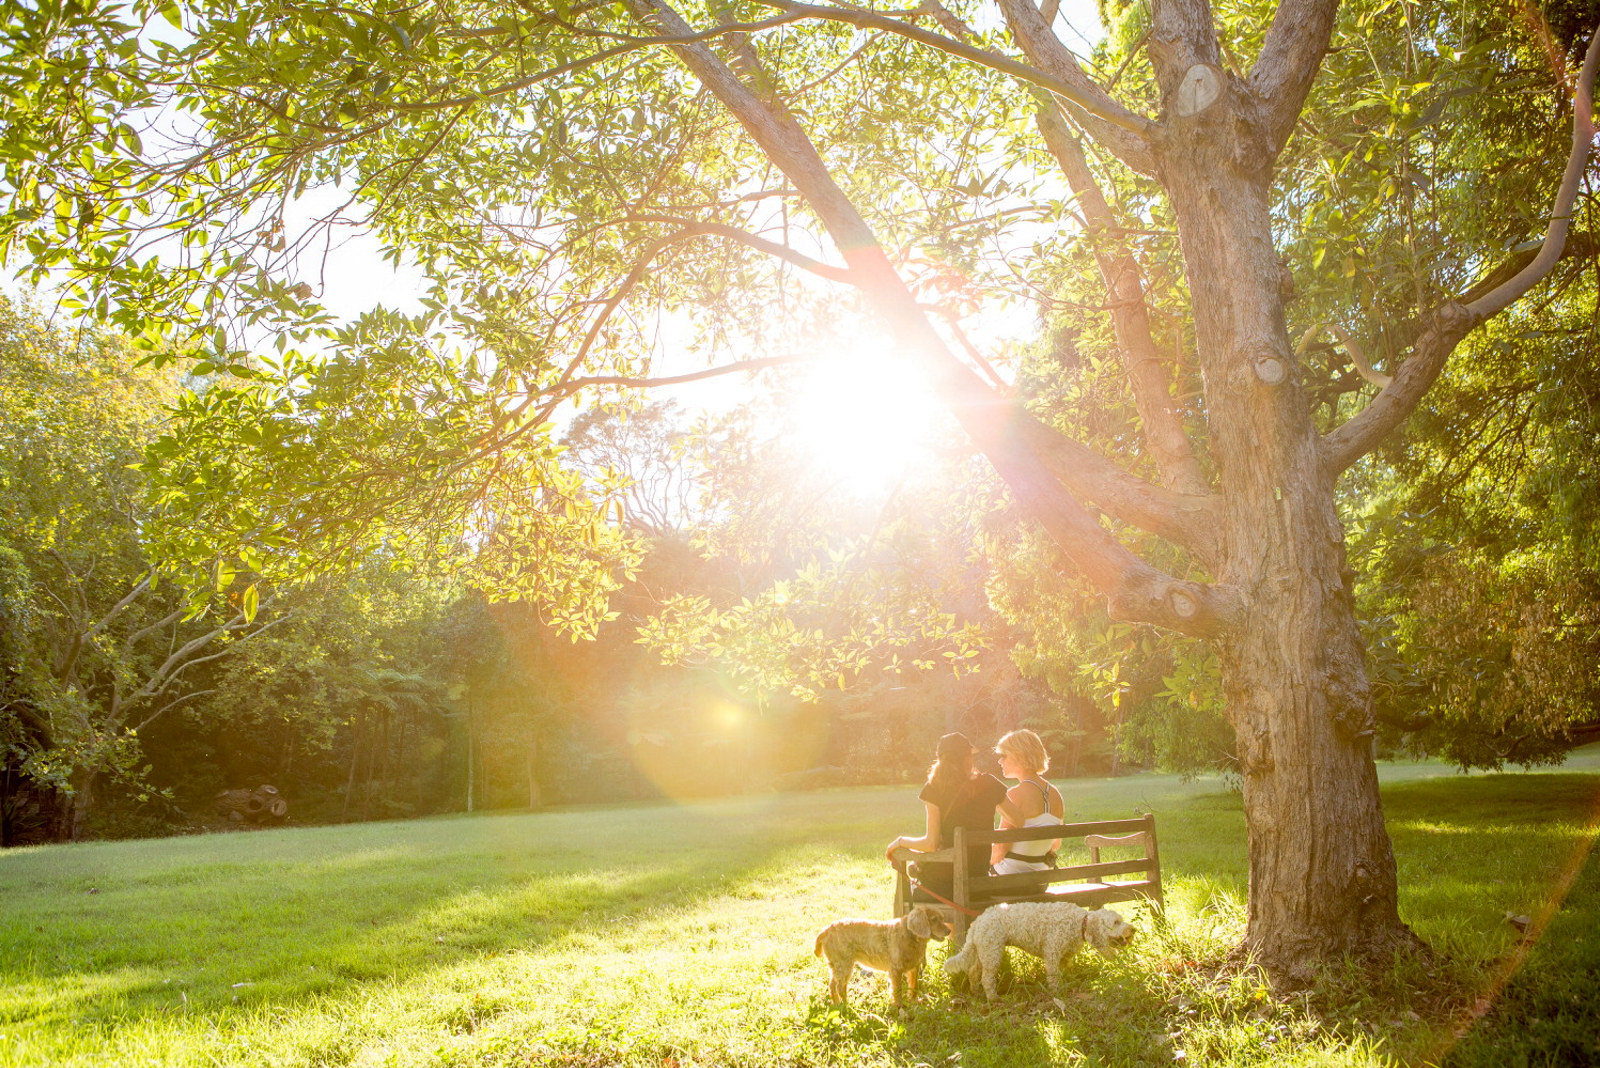 Two people sitting on backlit bench under tree with dogs.